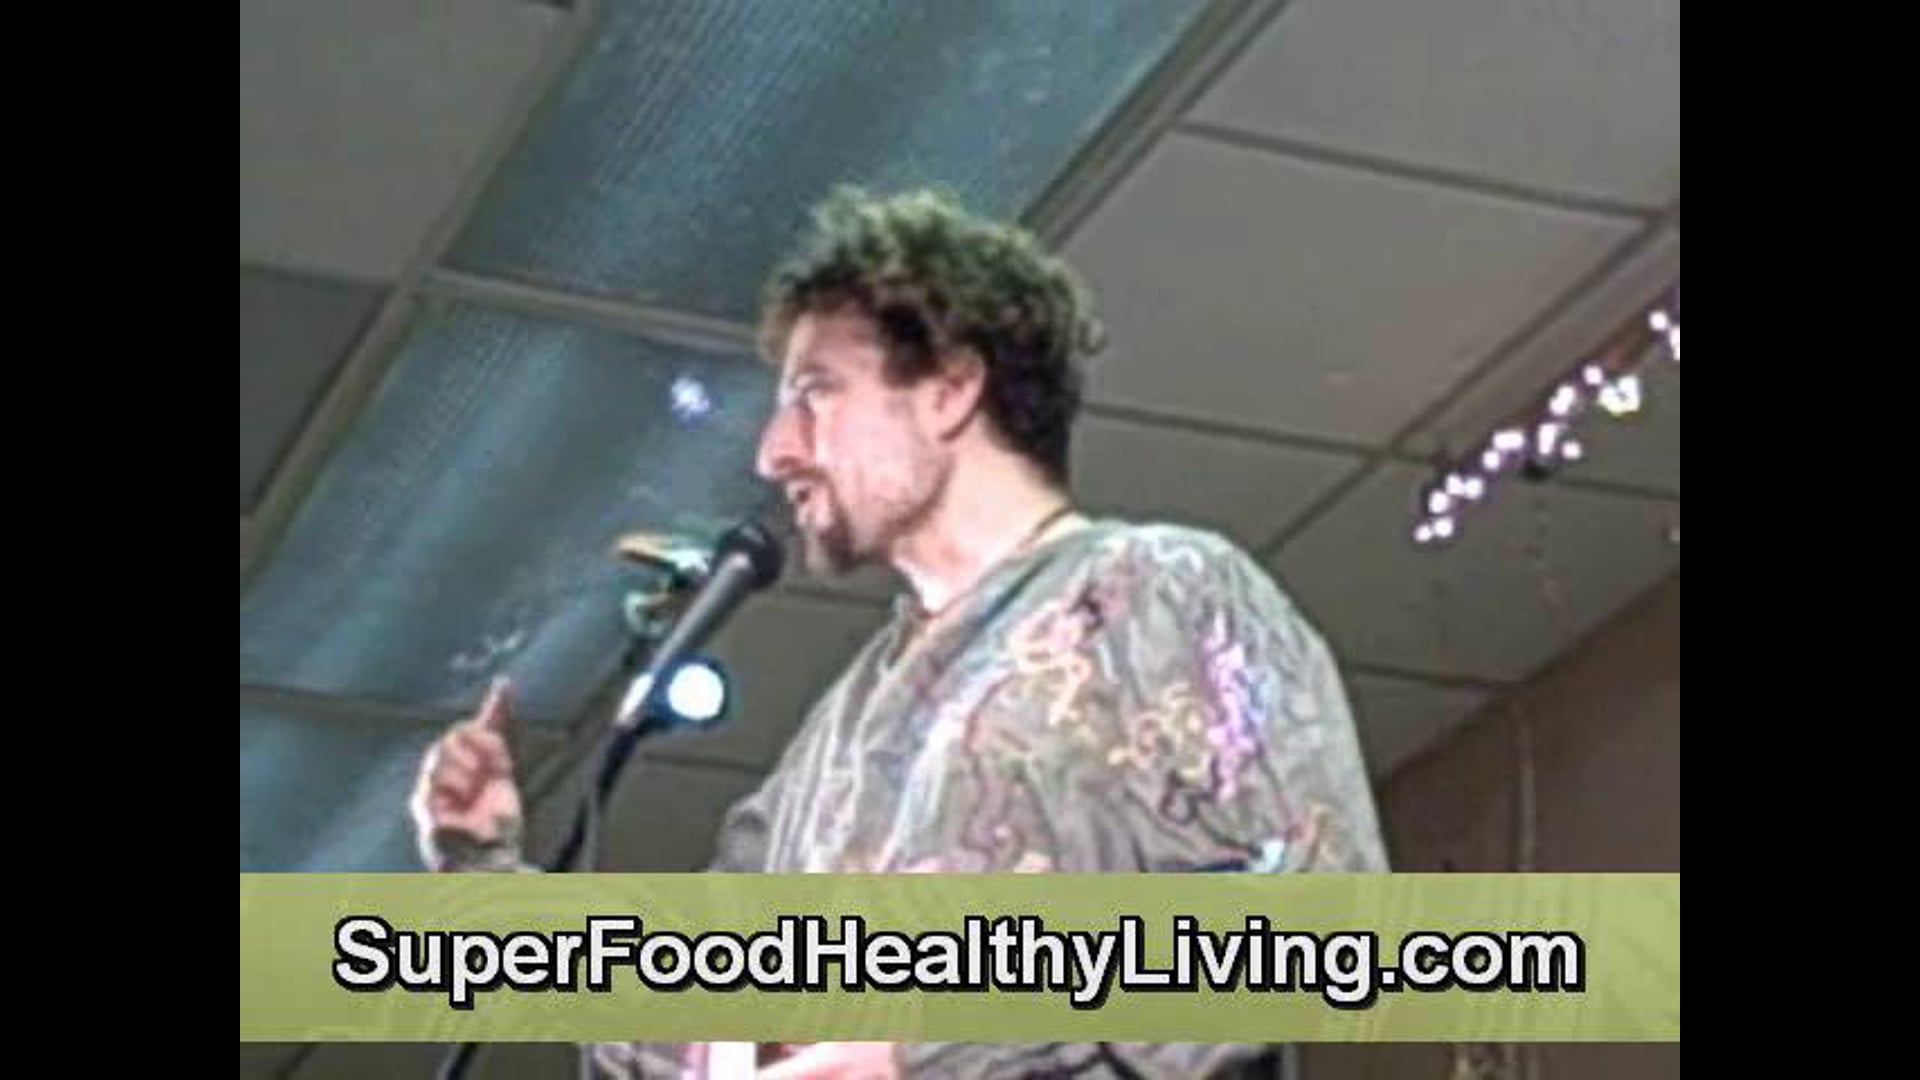 Raw food dieting leads to weight loss success (Organic Super Foods)